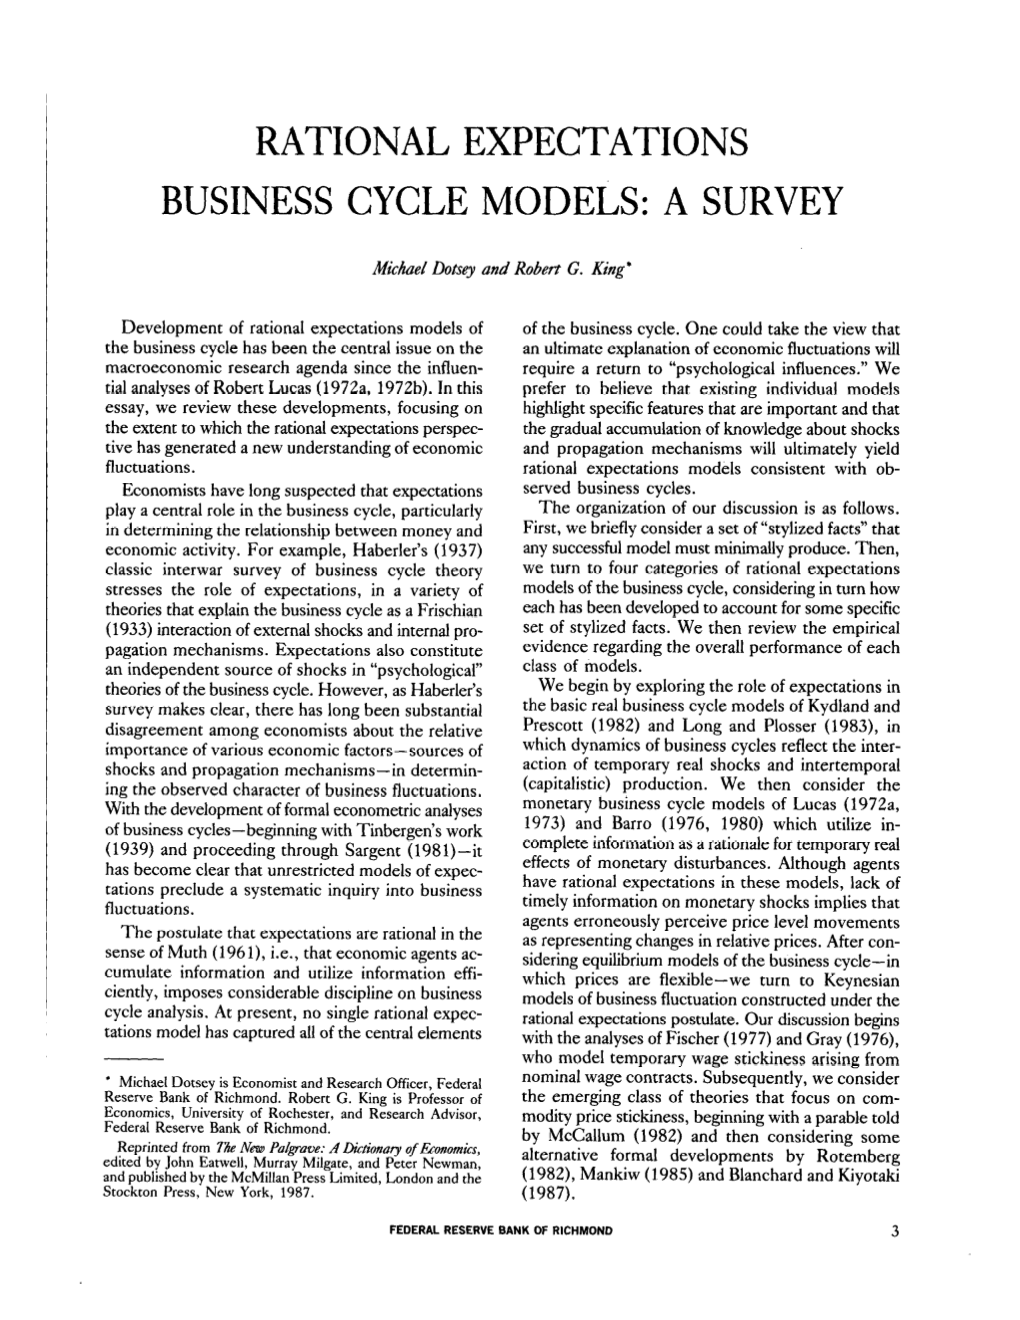 Rational Expectations Business Cycle Models: a Survey